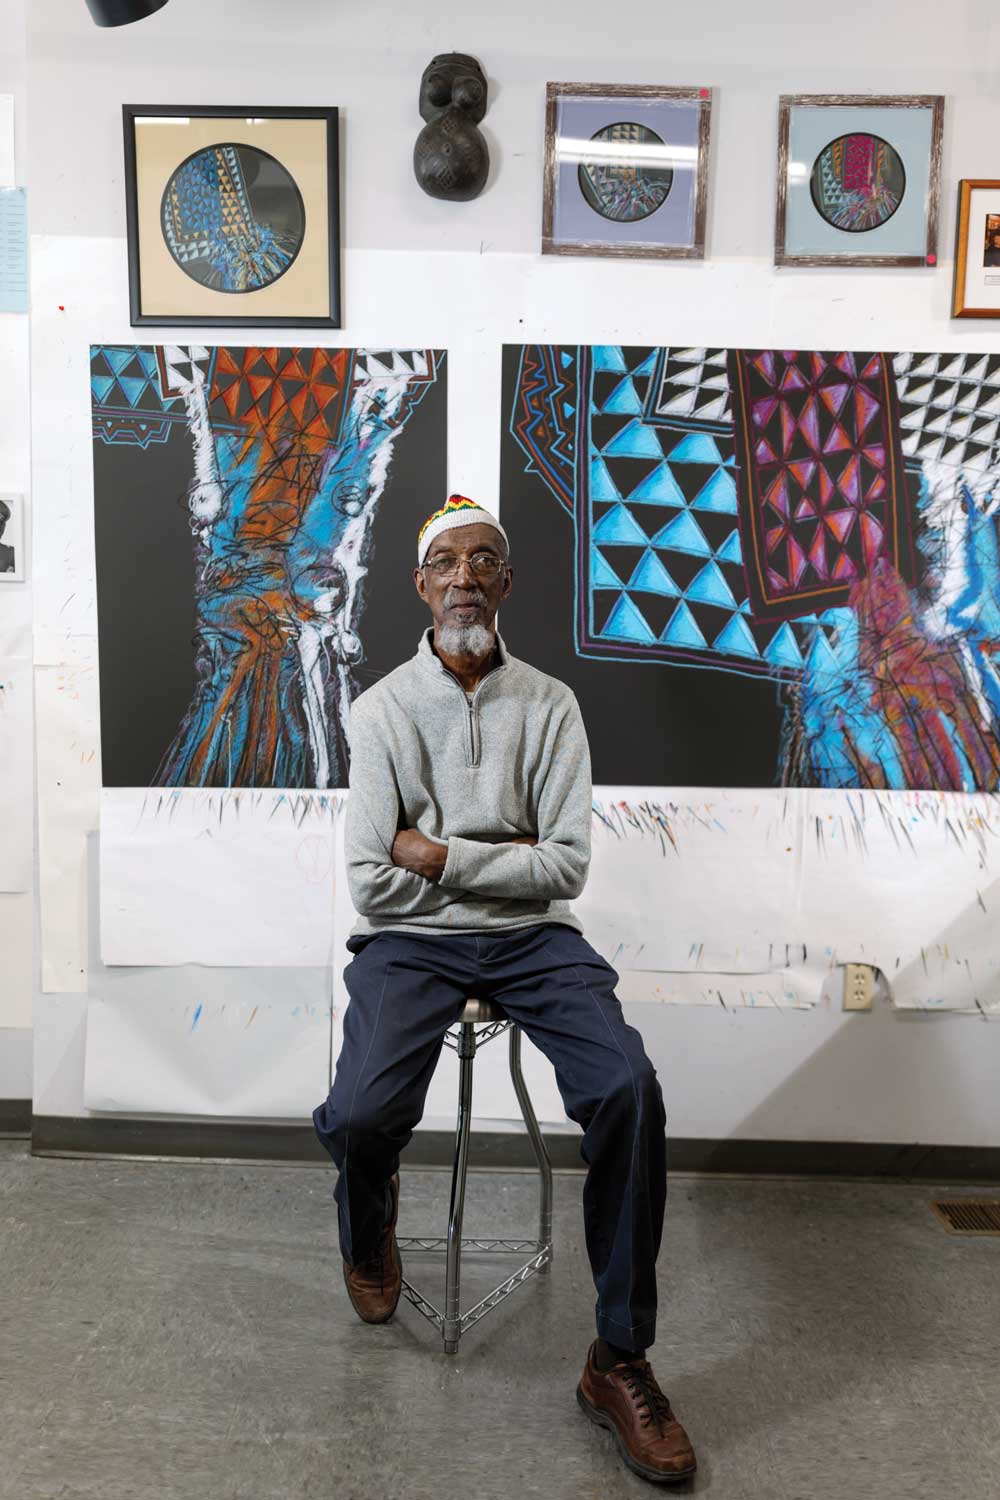 Willia "Bing" Davis poses on a stool in his studio with colorful artwork behind him.